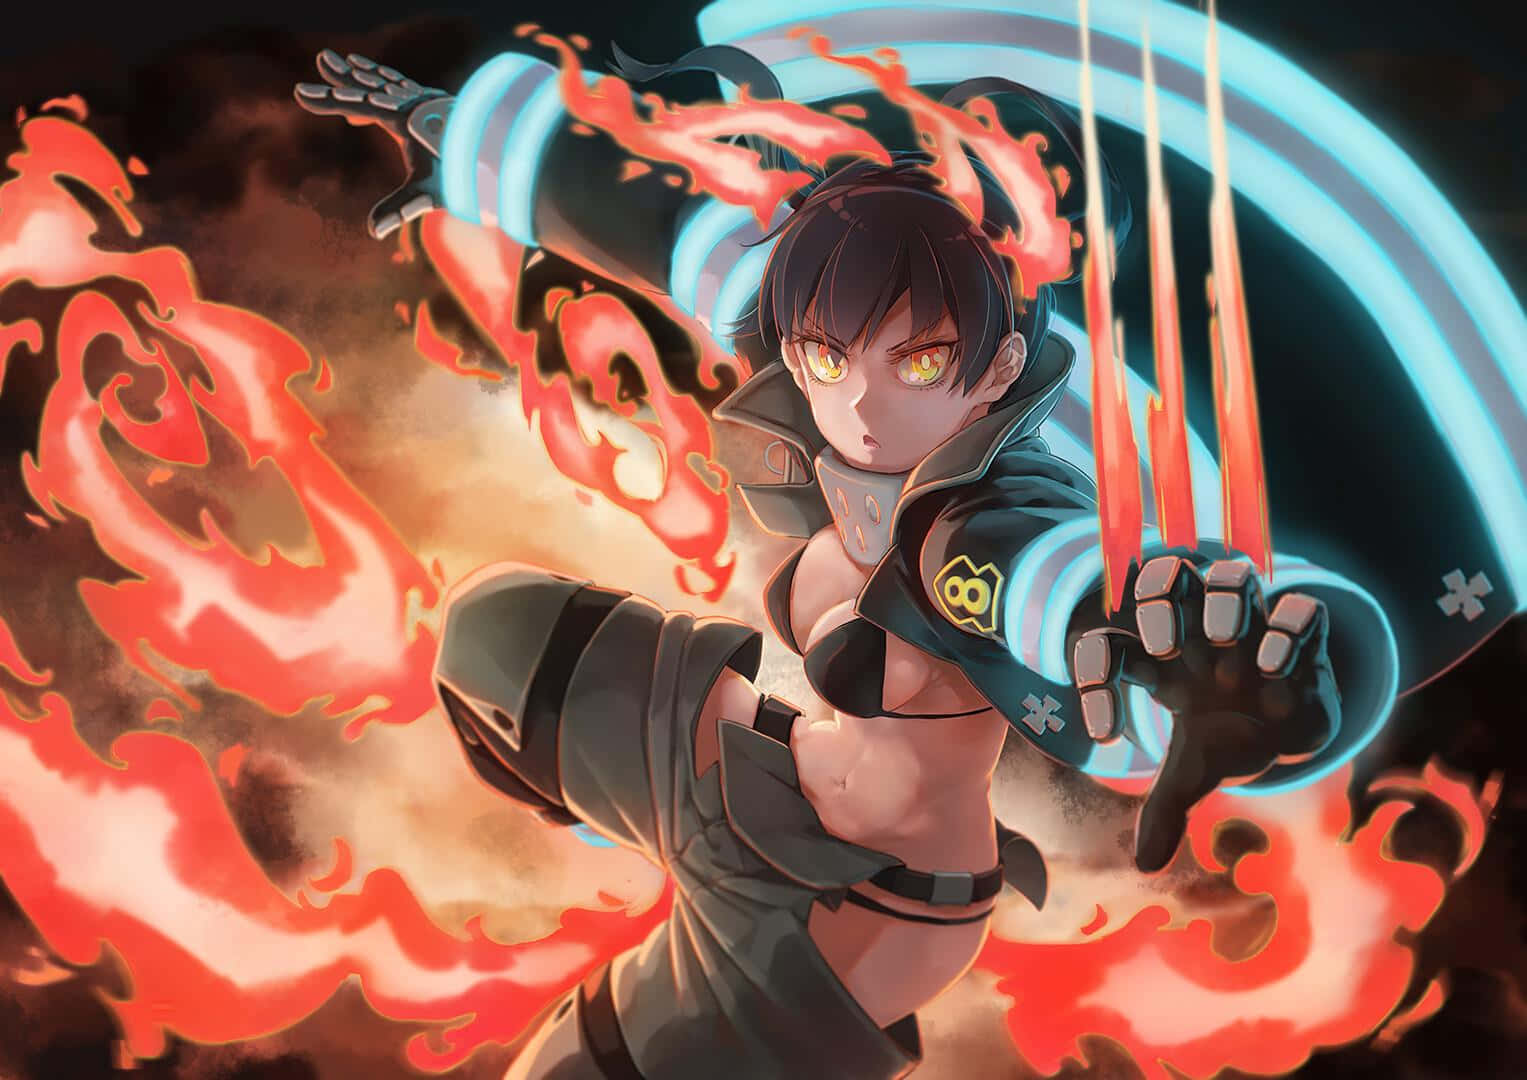 A Female Anime Character With Flames In Her Hands Wallpaper